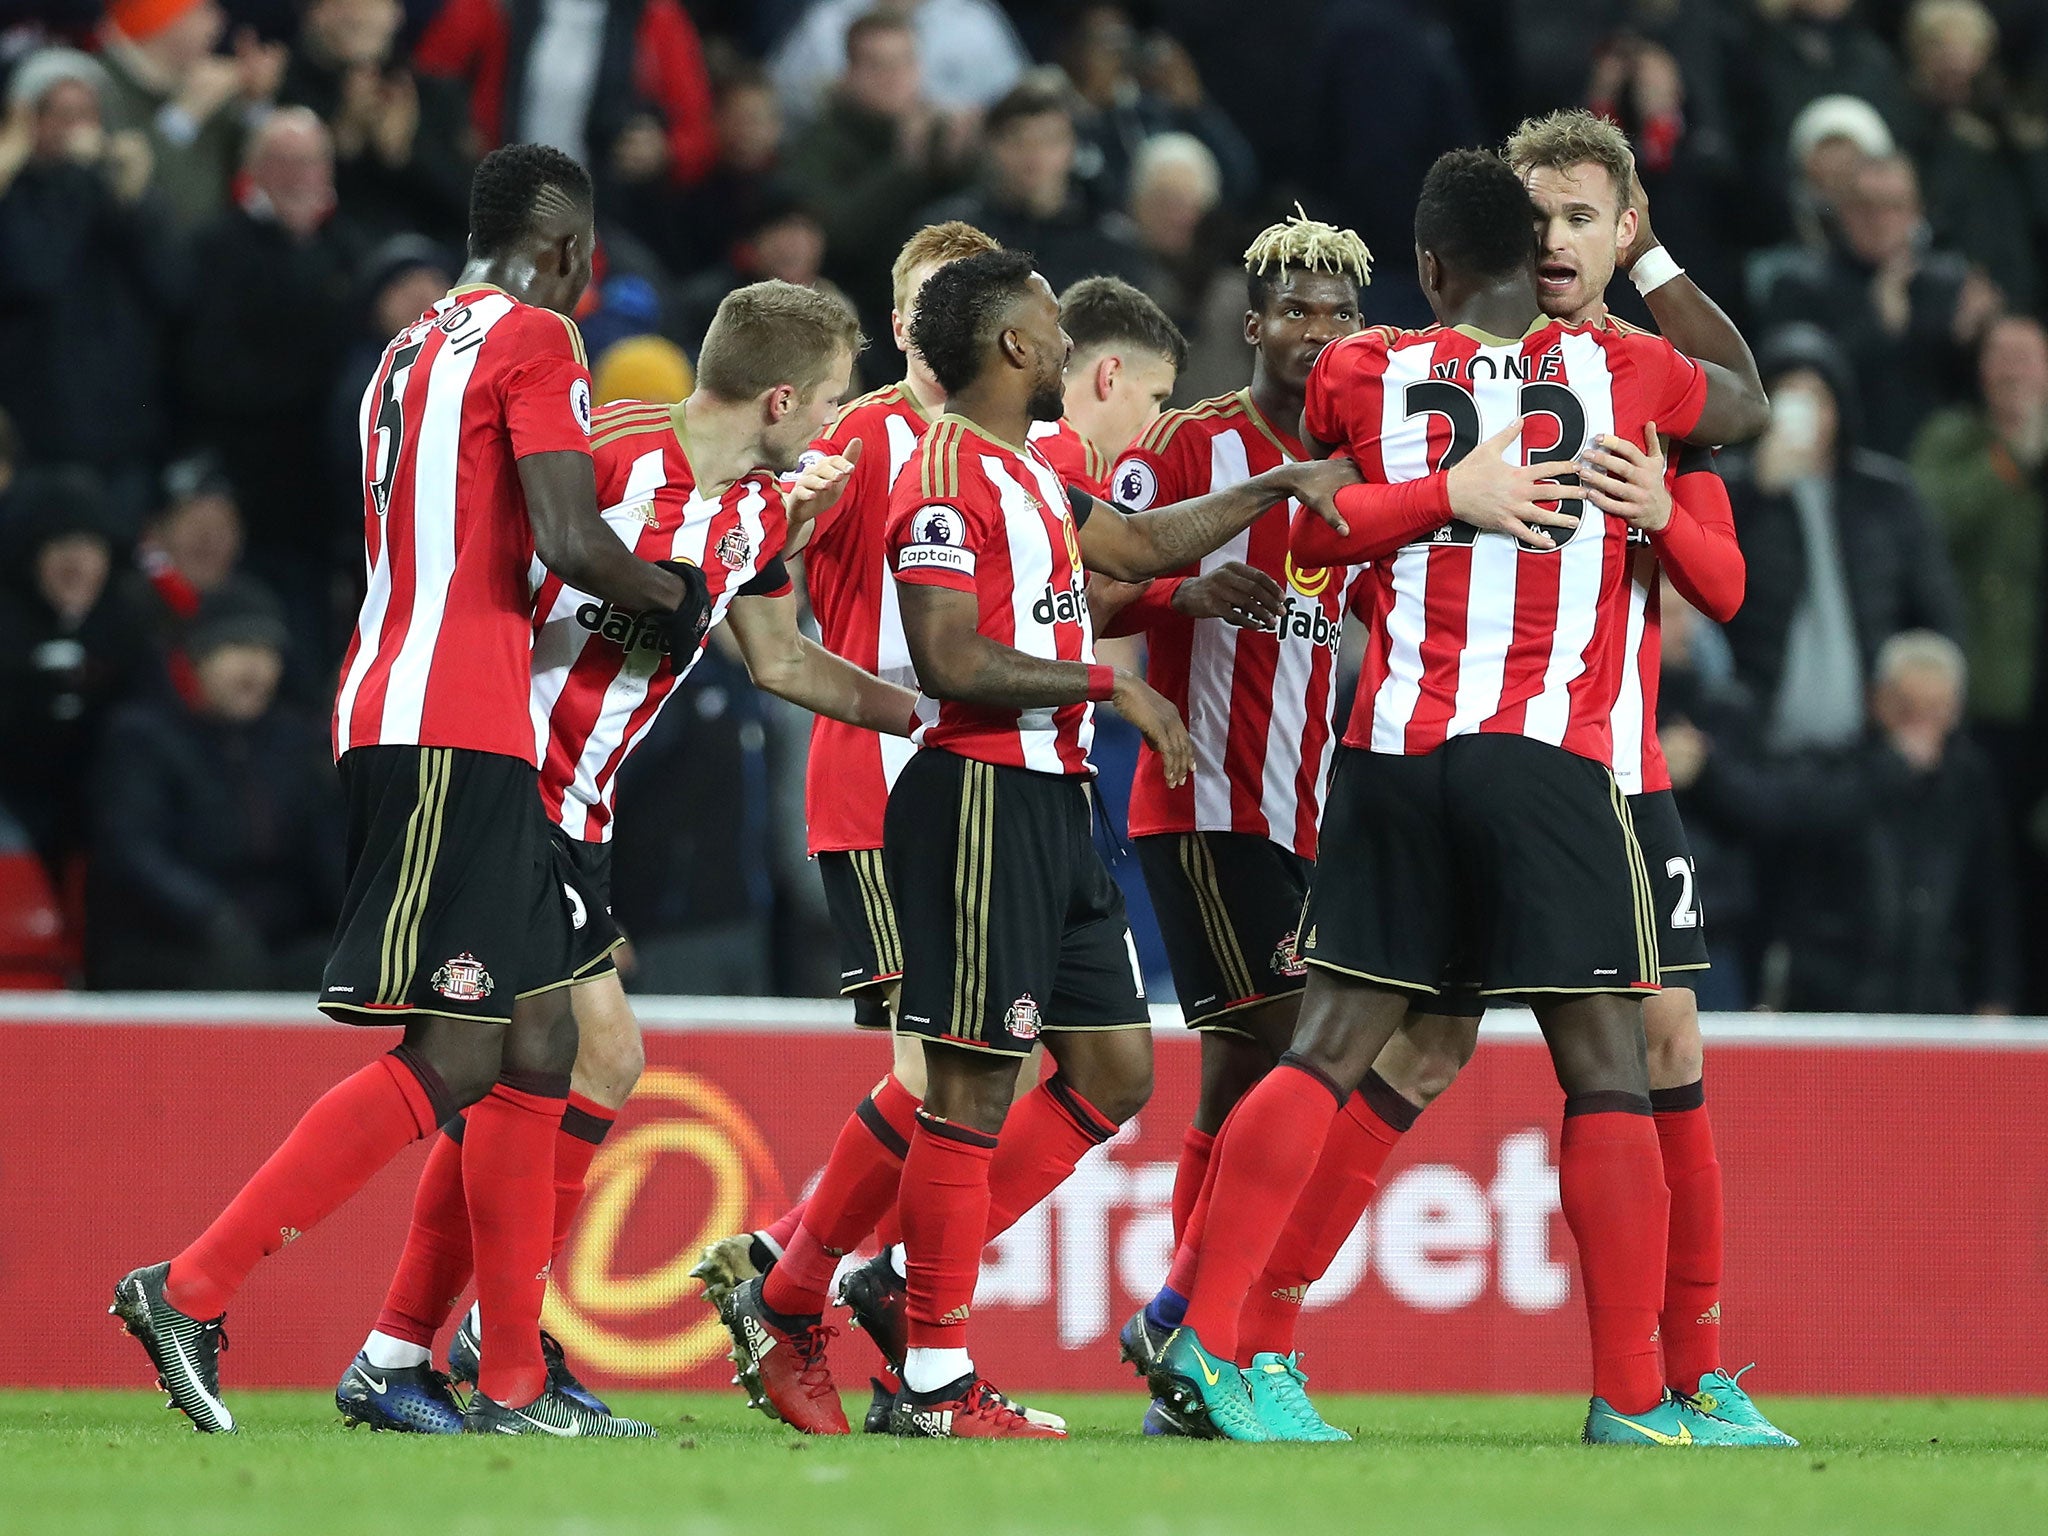 Sunderland moved off from the bottom of the table after beating the Foxes